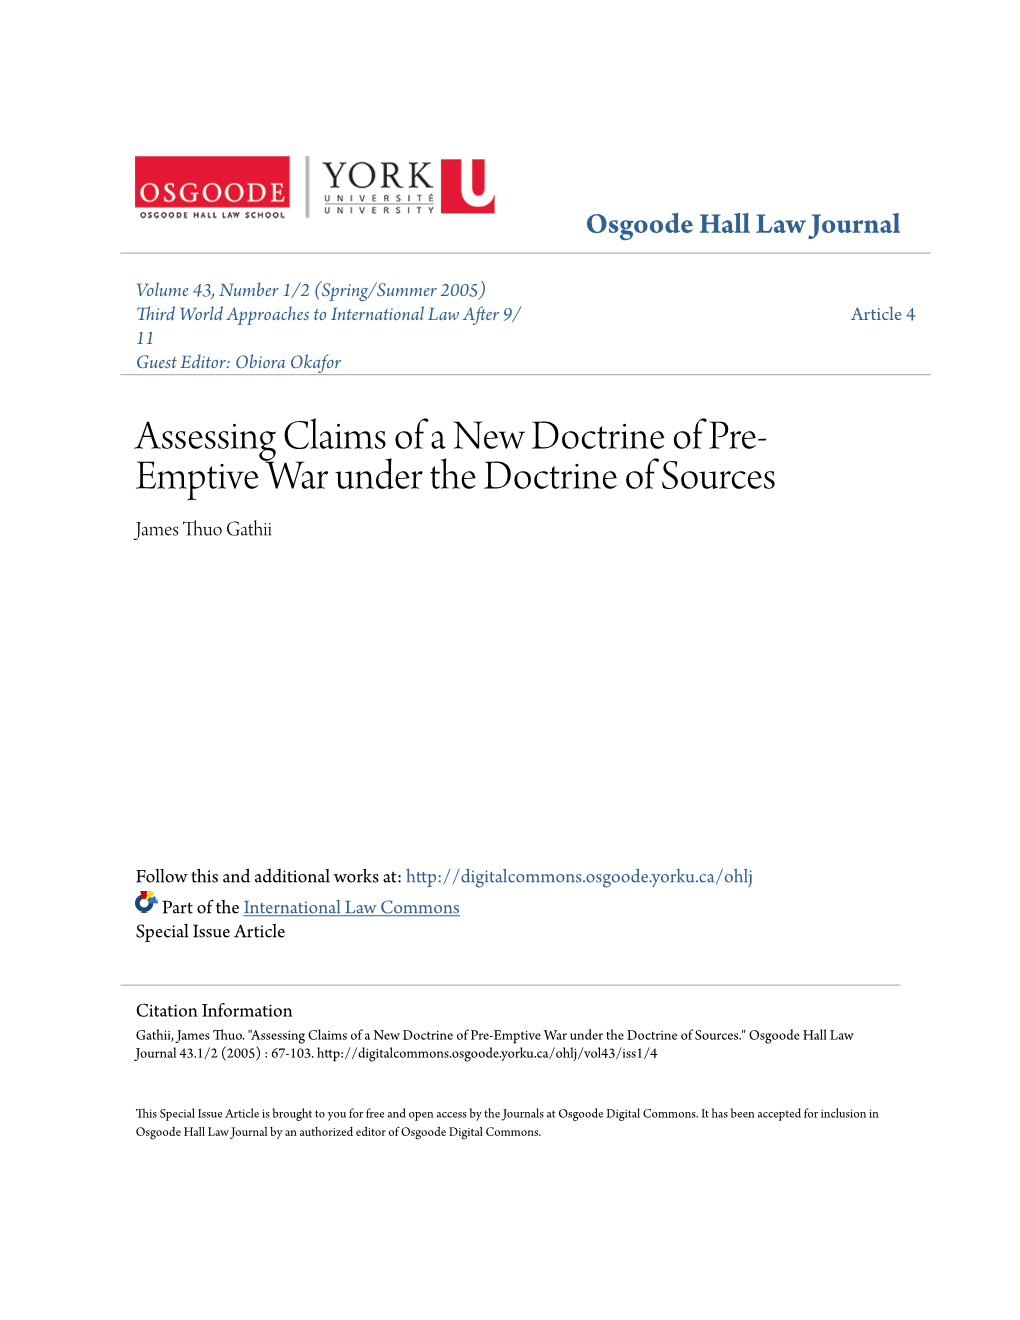 Assessing Claims of a New Doctrine of Pre-Emptive War Under the Doctrine of Sources." Osgoode Hall Law Journal 43.1/2 (2005) : 67-103